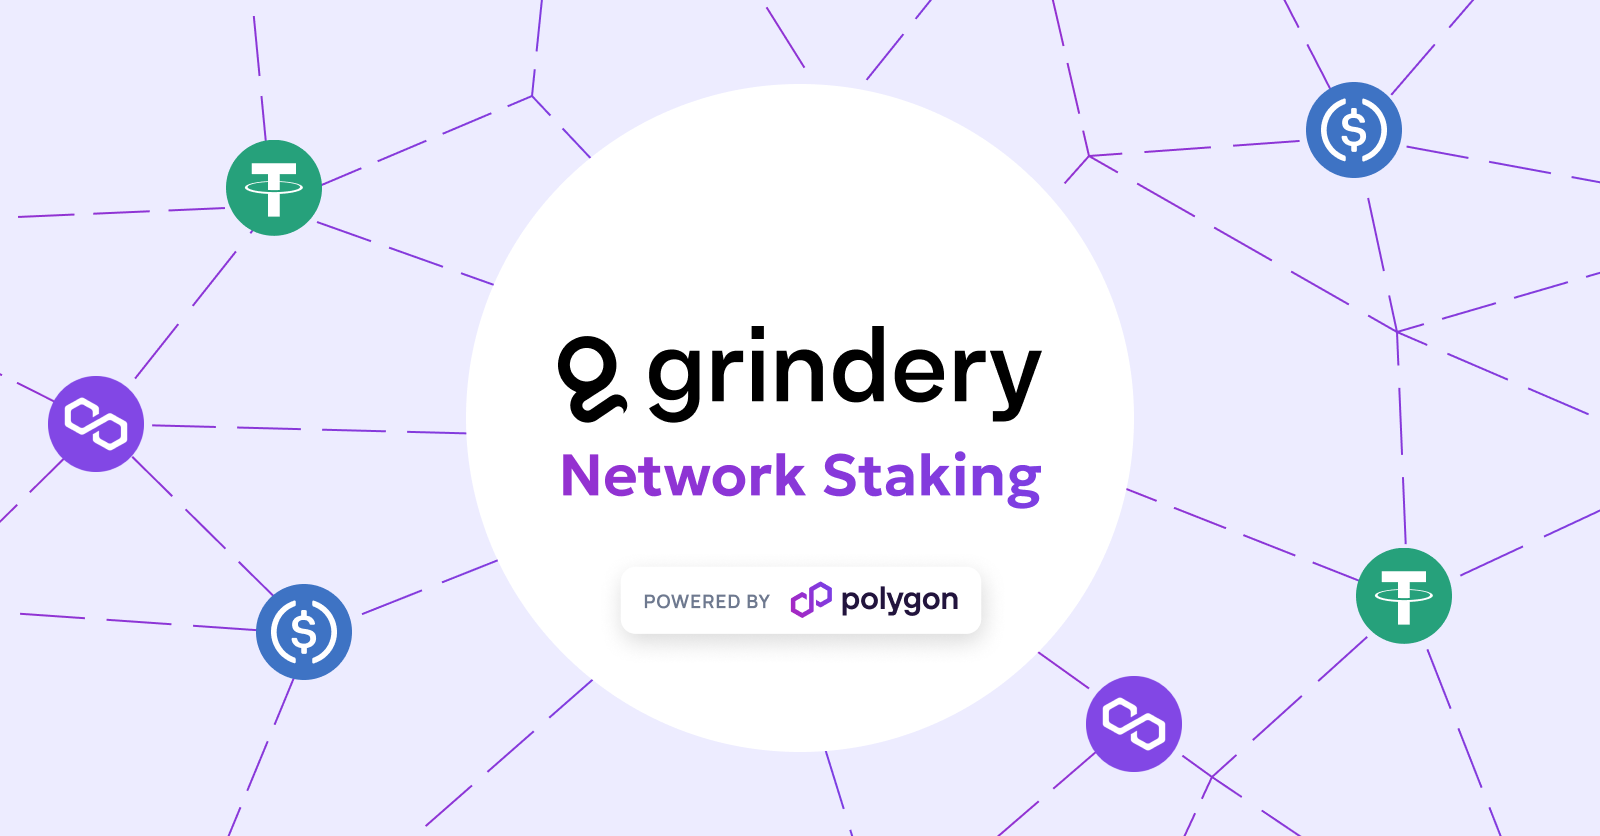 Live now: Network Staking on Polygon